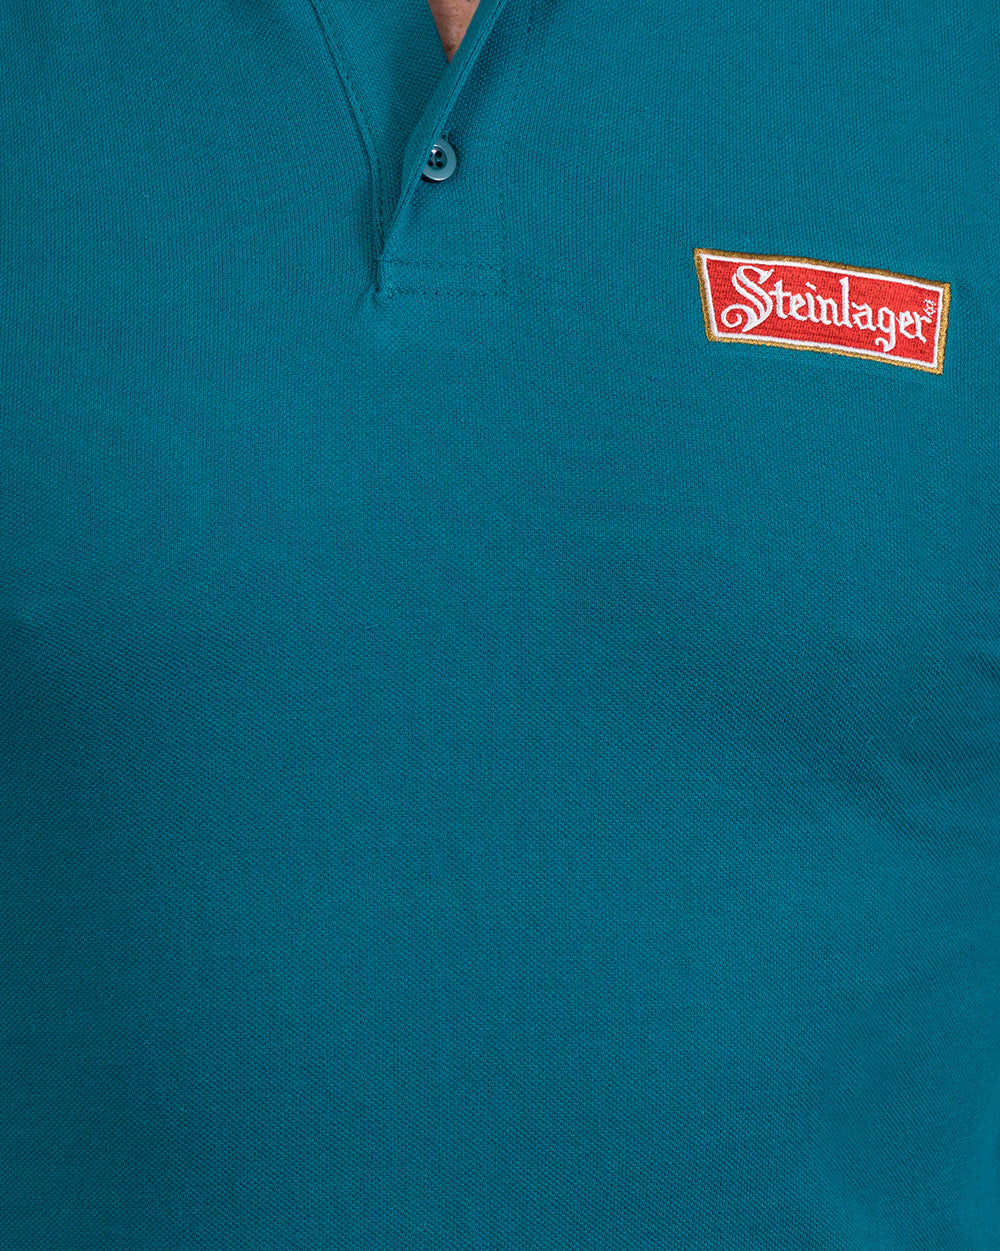 Steinlager Retro Green Polo -  Beer Gear Apparel & Merchandise - Speights - Lion Red - VB - Tokyo Dy merch